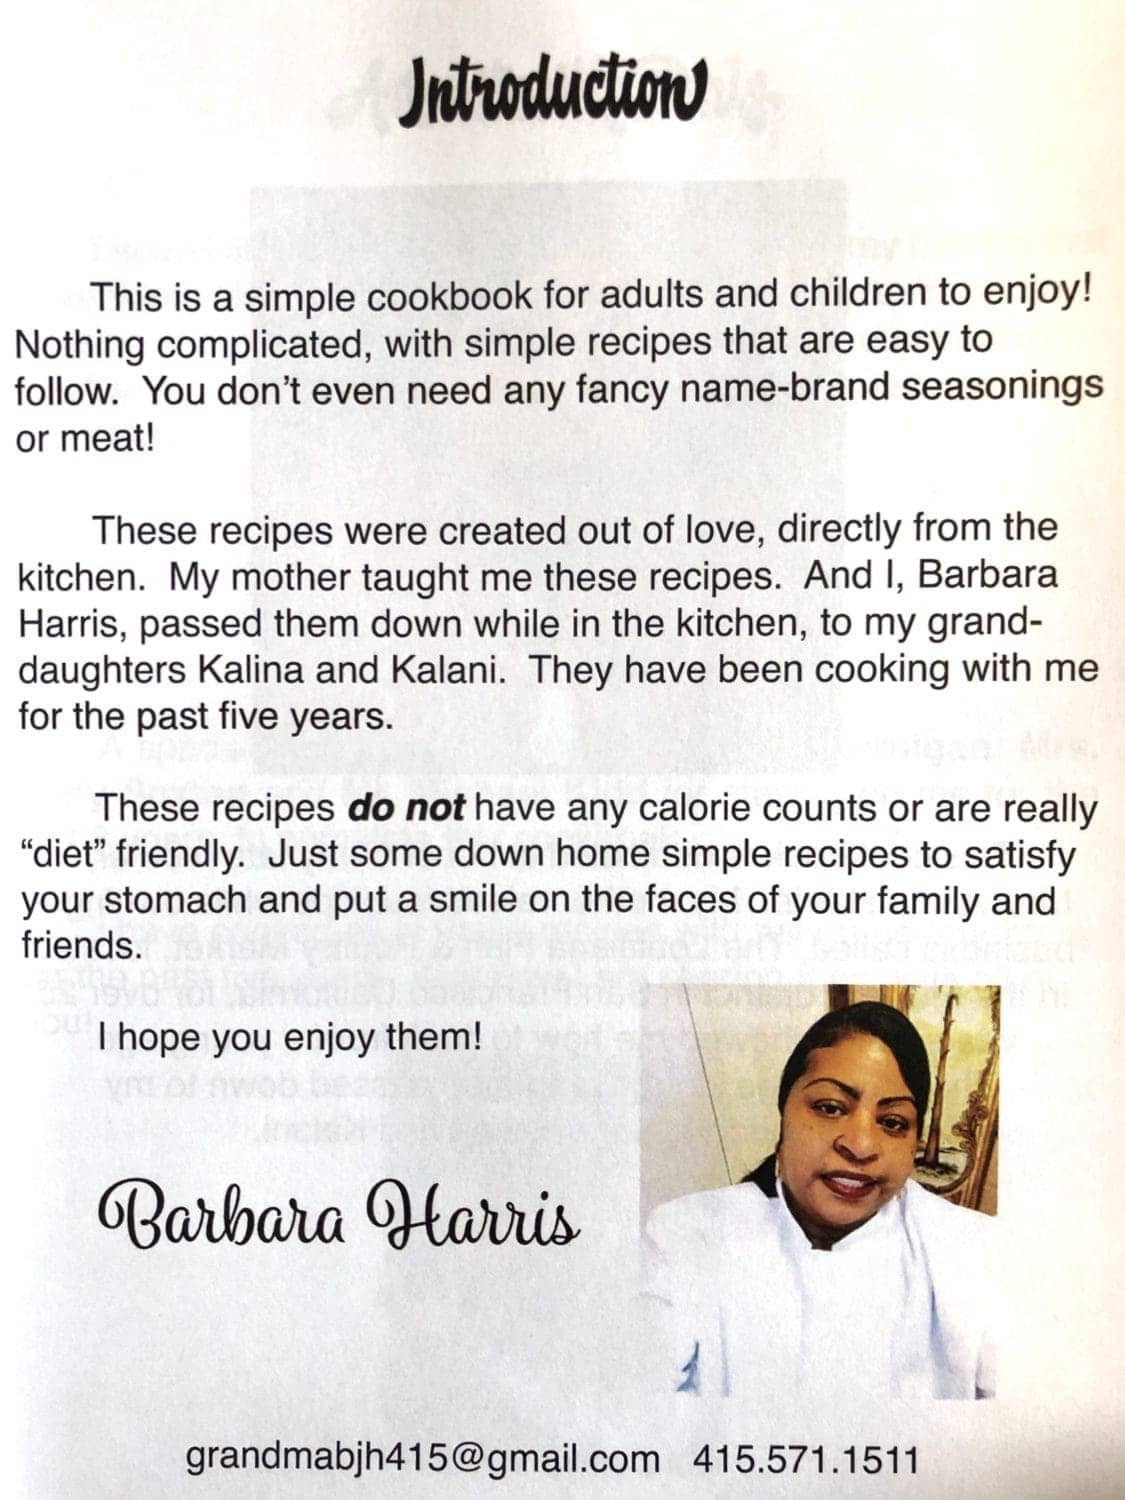 Introduction-to-‘Kooking-with-Kalina-and-Kalani-cookbook-by-Barbara-Harris-070621, Eight-year-old twin sisters Kalina and Kalani cook their favorites!, Culture Currents 